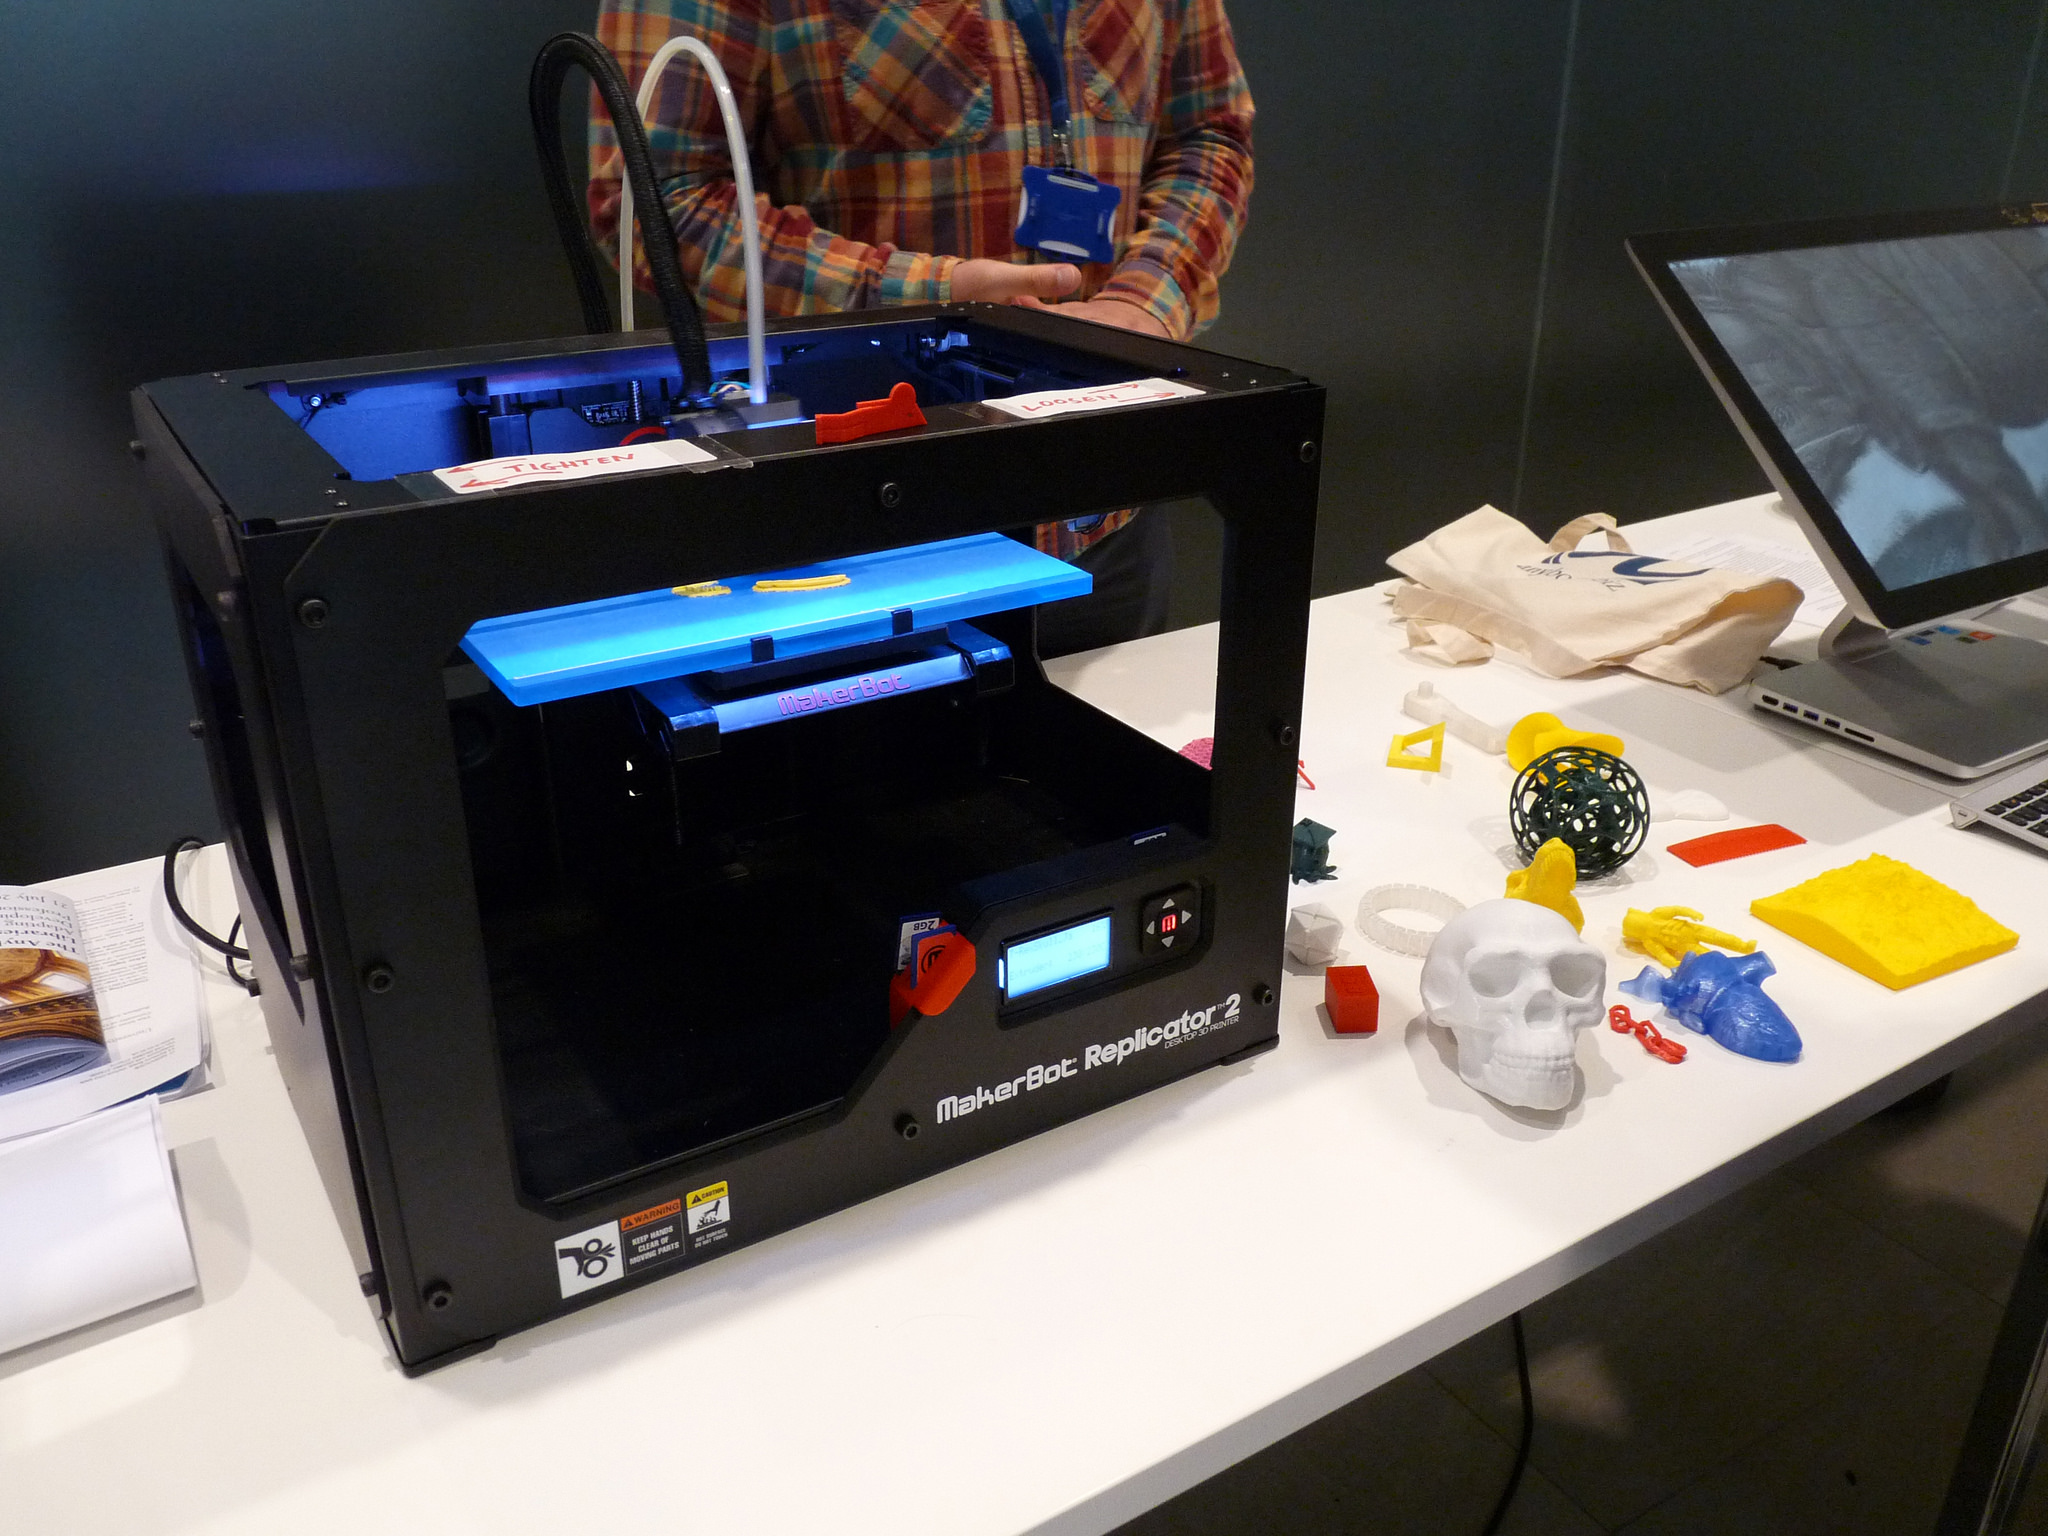 Are you 3D printing yet?